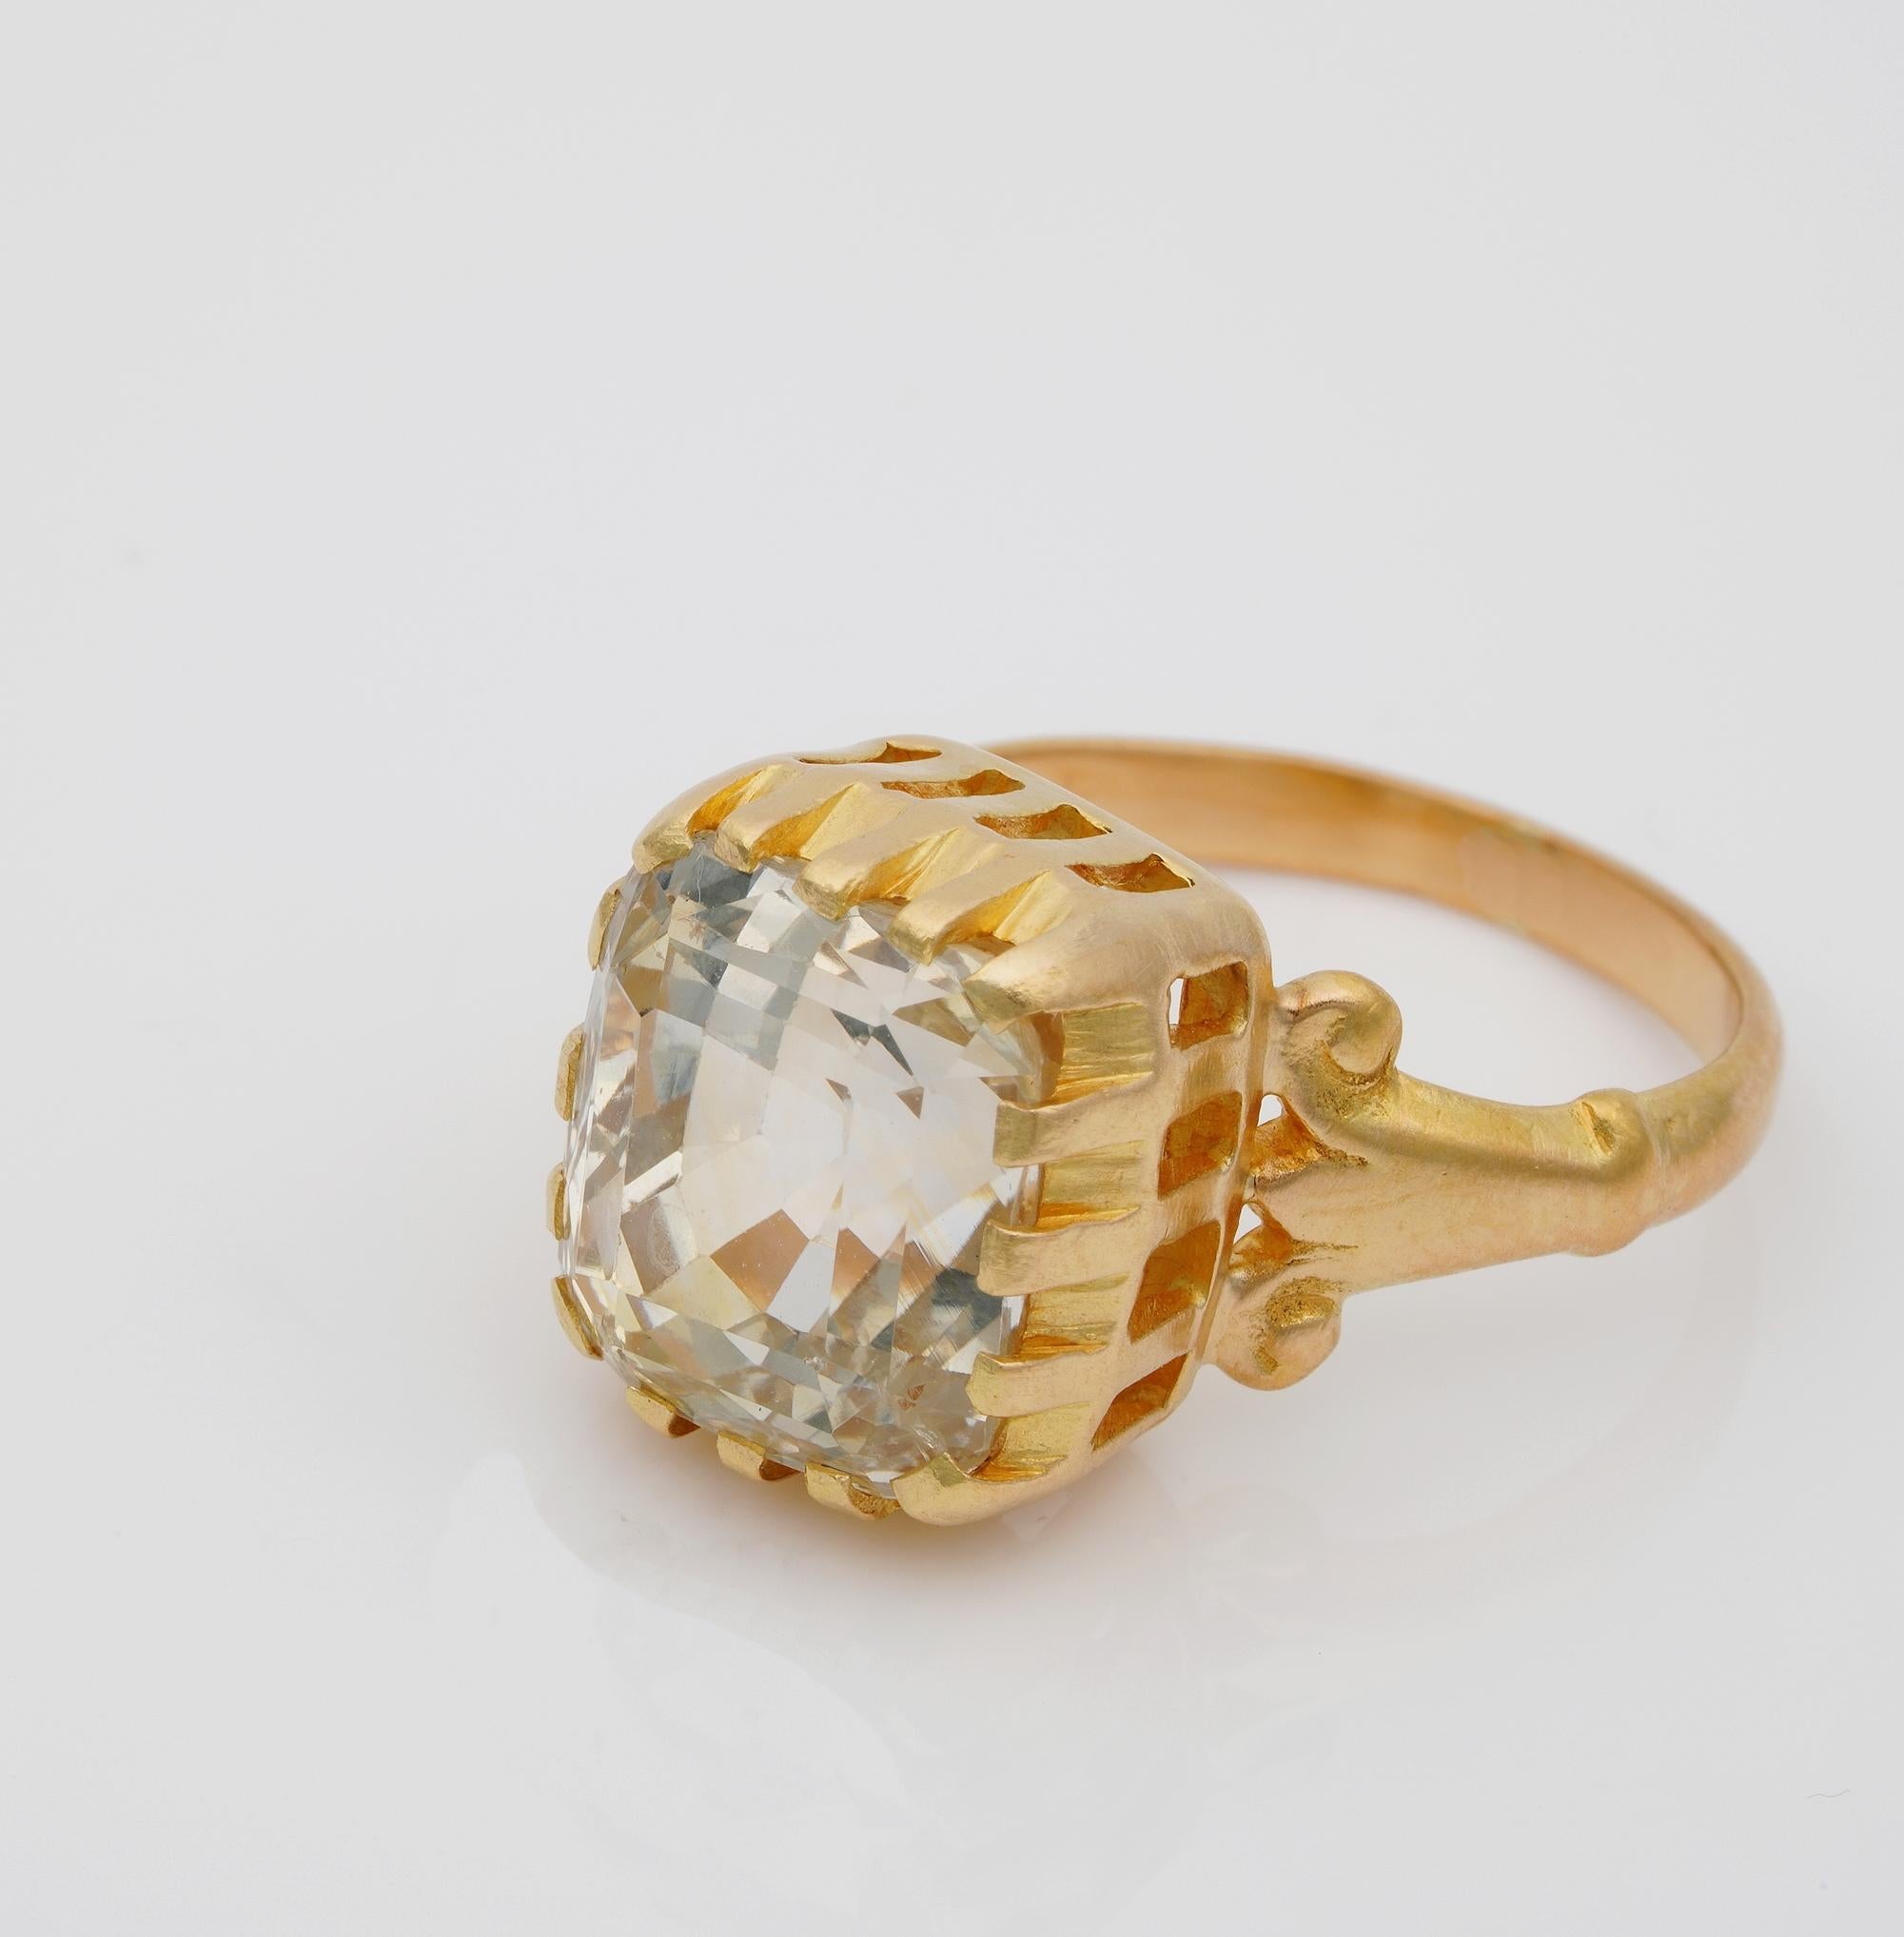 Reinassance Revival 11.42 Ct Certified Unheated Yellow Ceylon Sapphire Ri In Good Condition For Sale In Napoli, IT